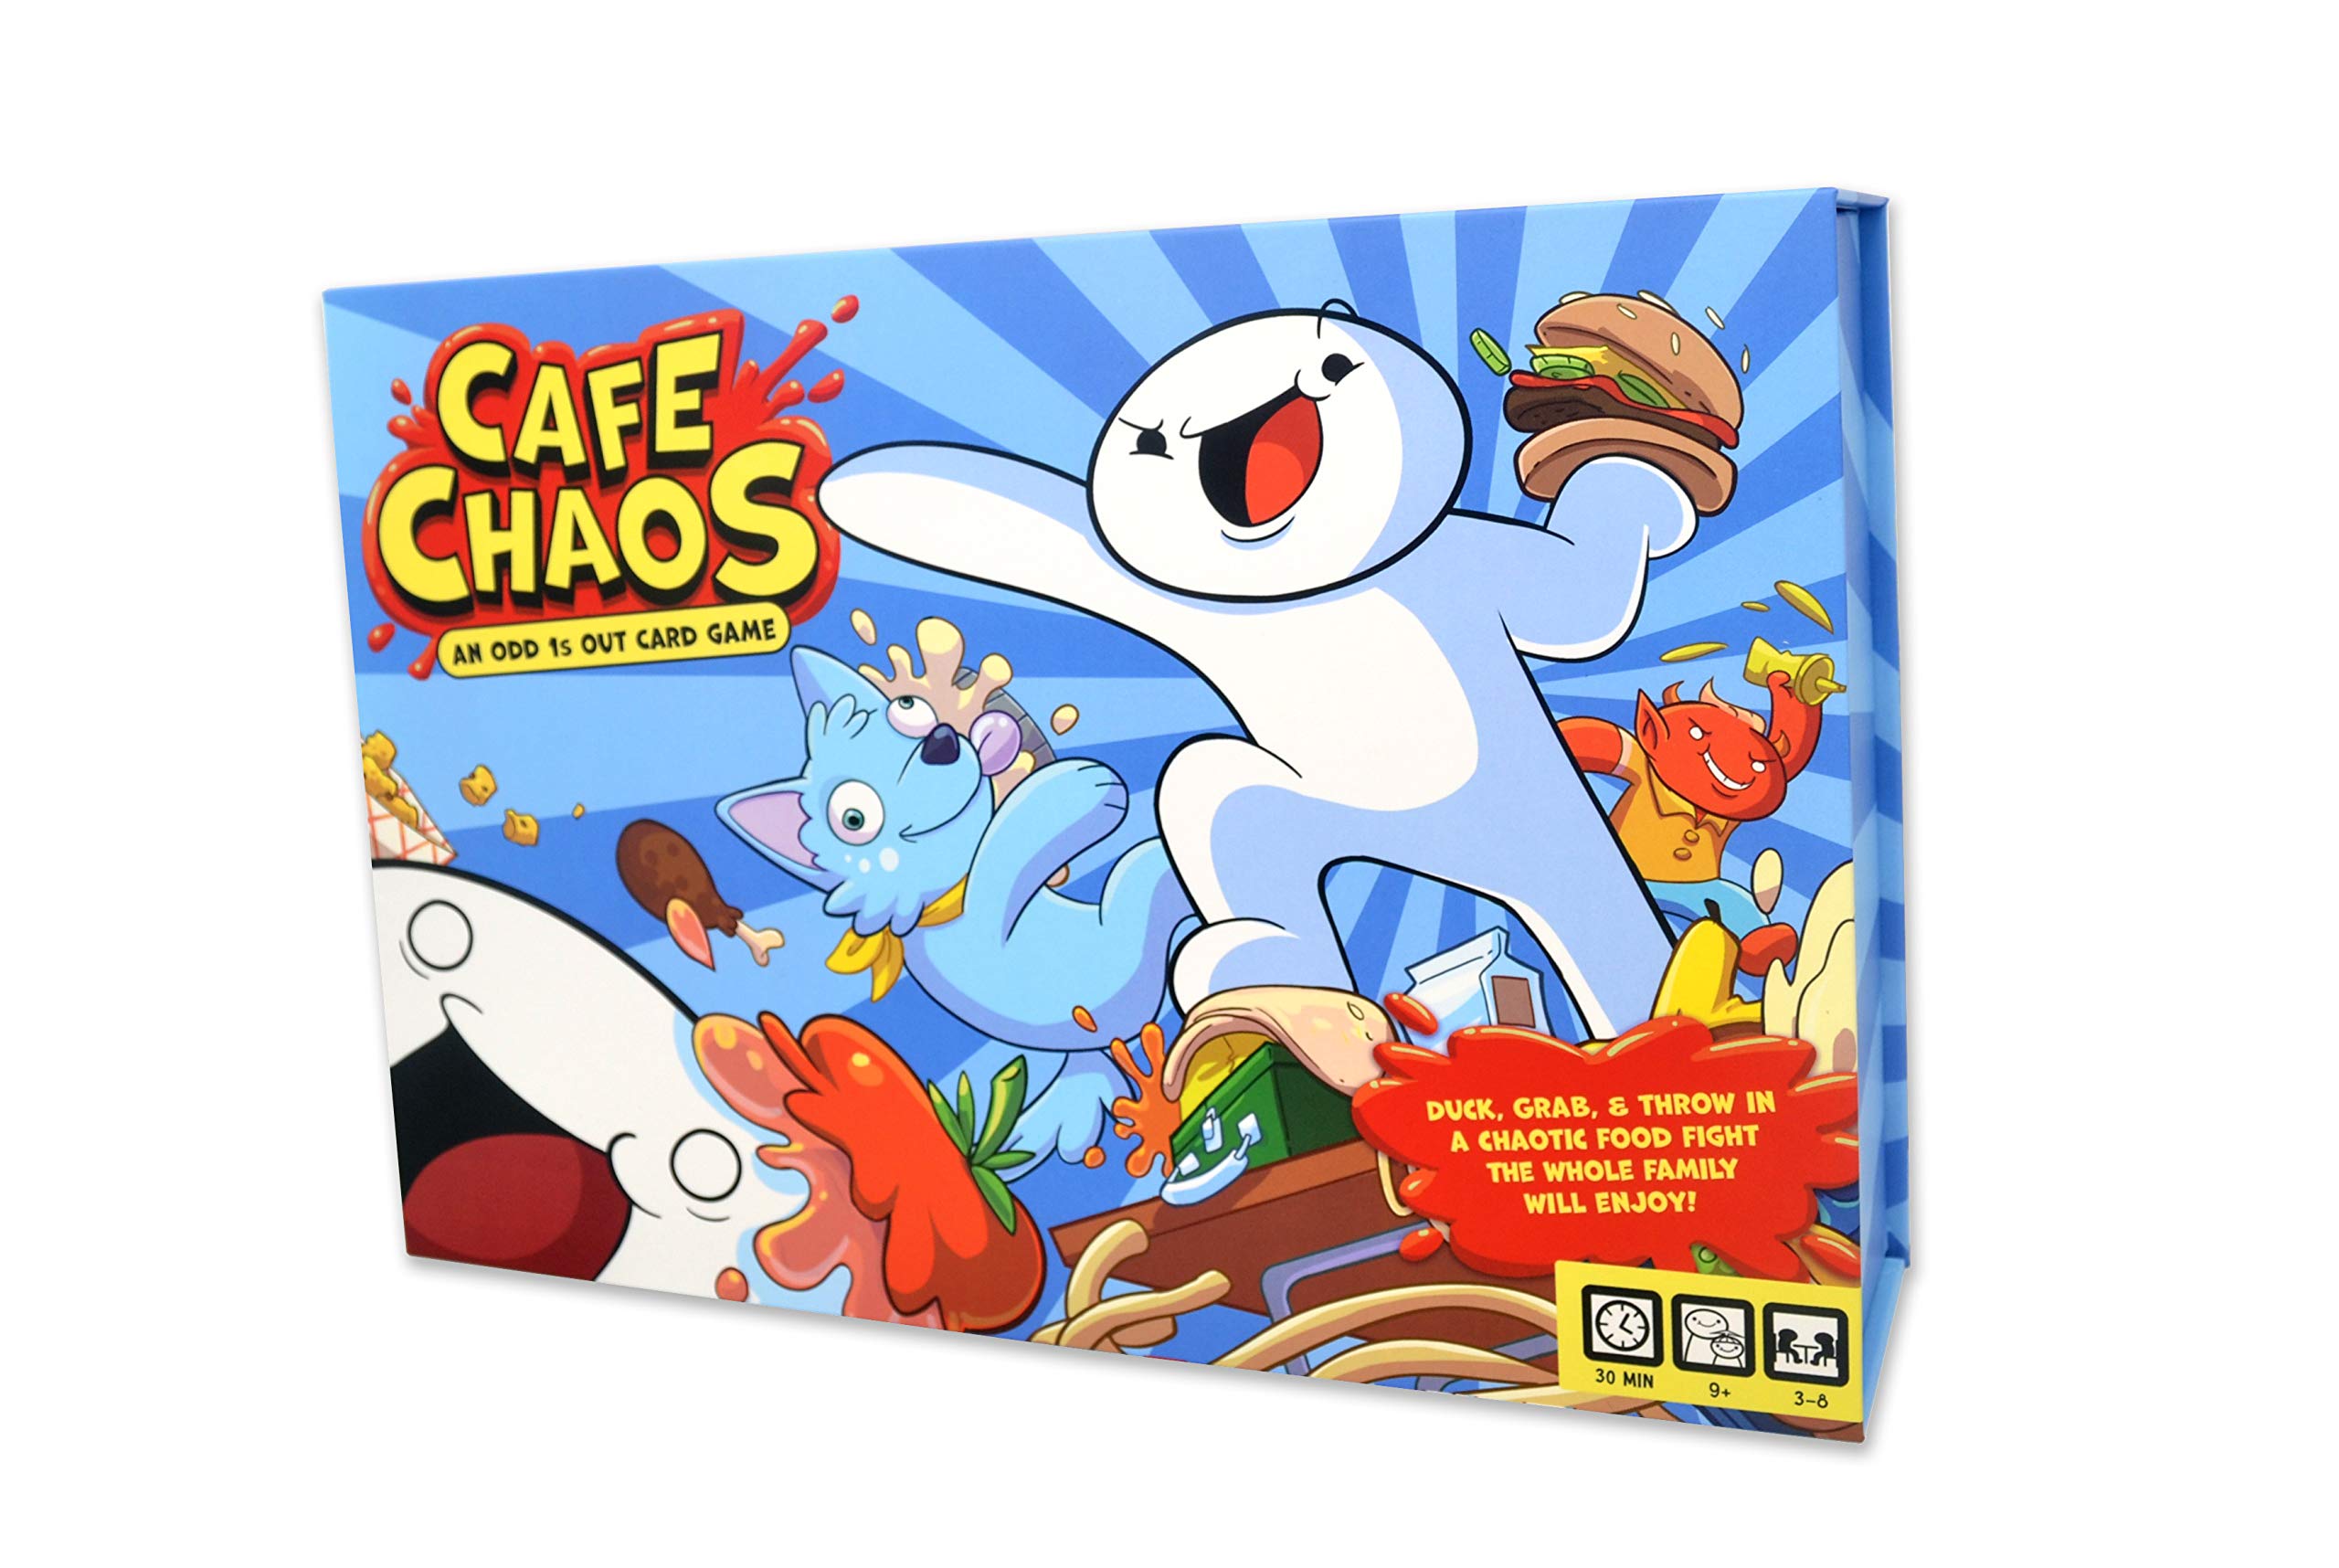 Cafe Chaos Card Game, TheOdd1sOut Original Game